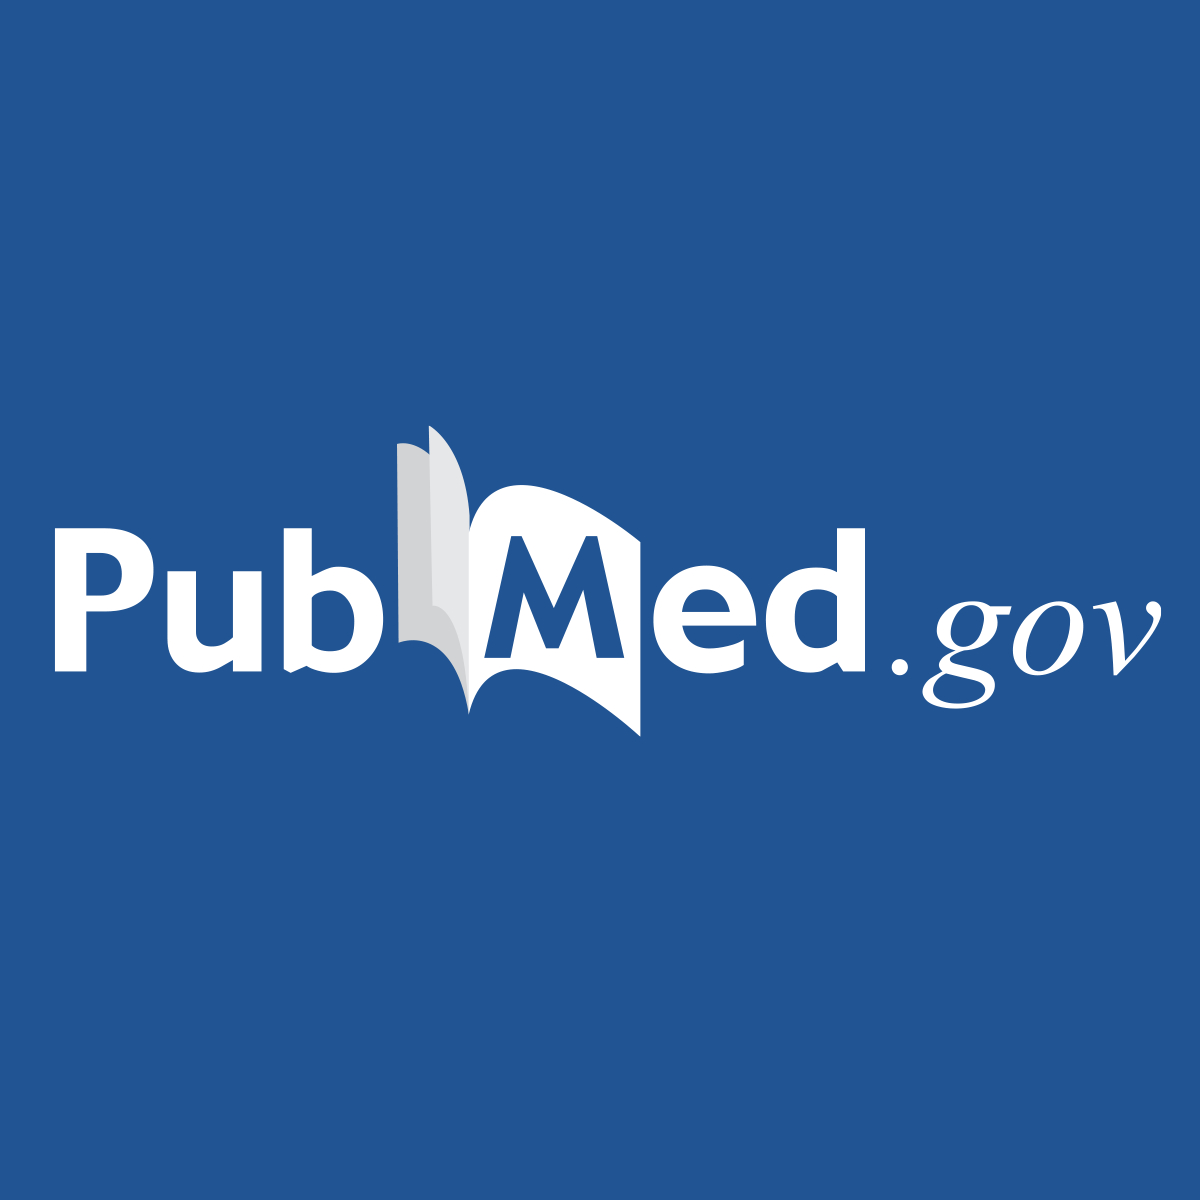 Analysis of Electronic Health Record Use and Clinical Productivity and Their Association With Physician Turnover